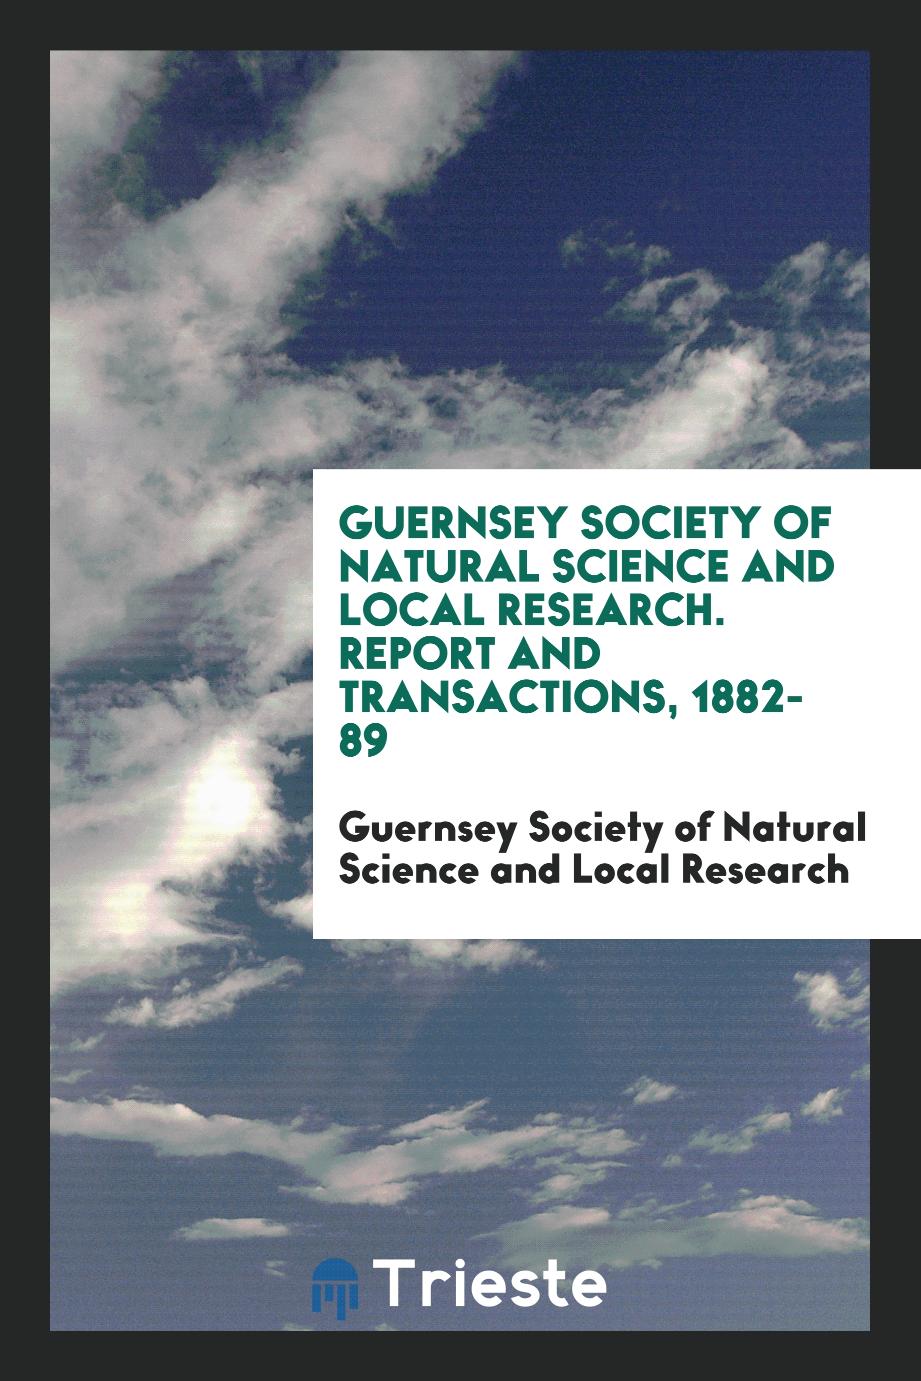 Guernsey Society of Natural Science and Local Research. Report and Transactions, 1882-89